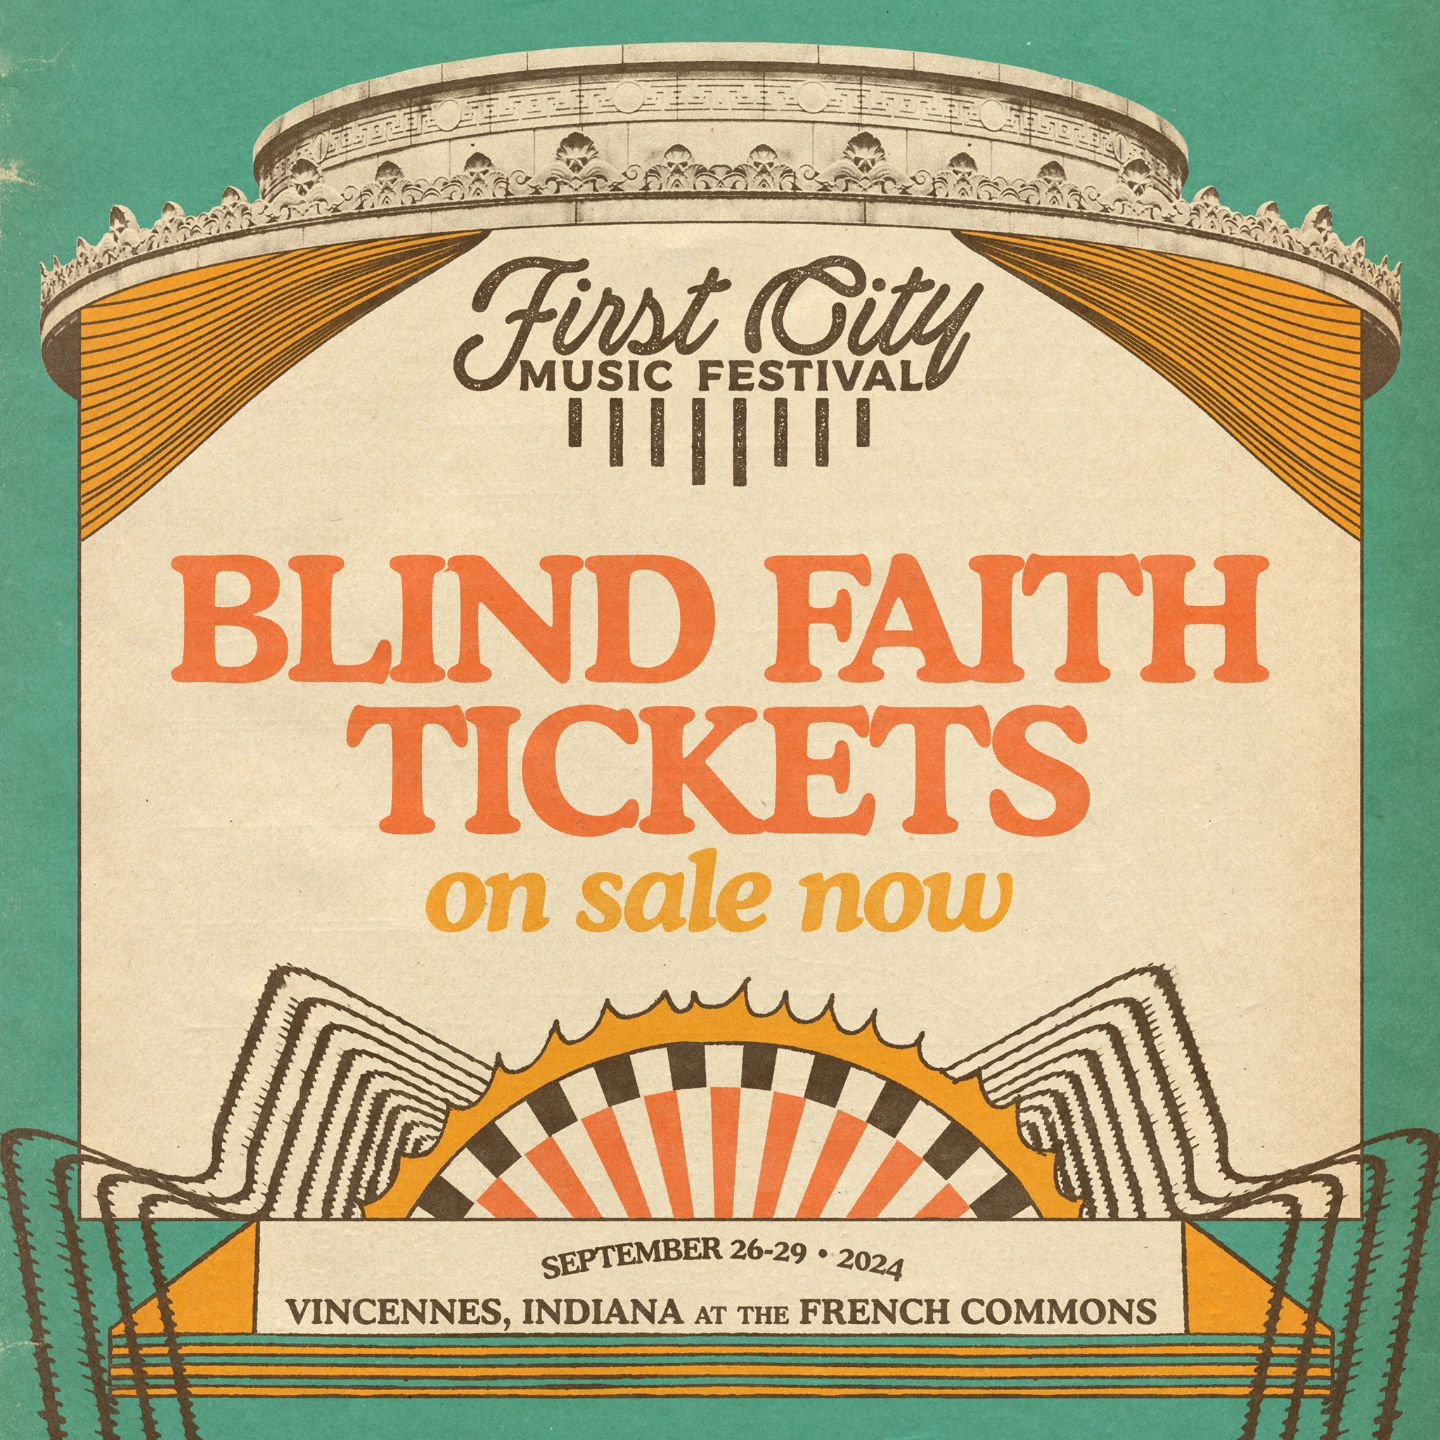 EDIT- SOLD OUT! Wow folks, we cant believe we sold out in less than 24 hours! Thanks for believing in our fest! 💙 Those of you who missed out, initial line up drop &amp; Tier 1 tickets on sale April 15th! 

Blind Faith tickets on sale NOW, we ain't 